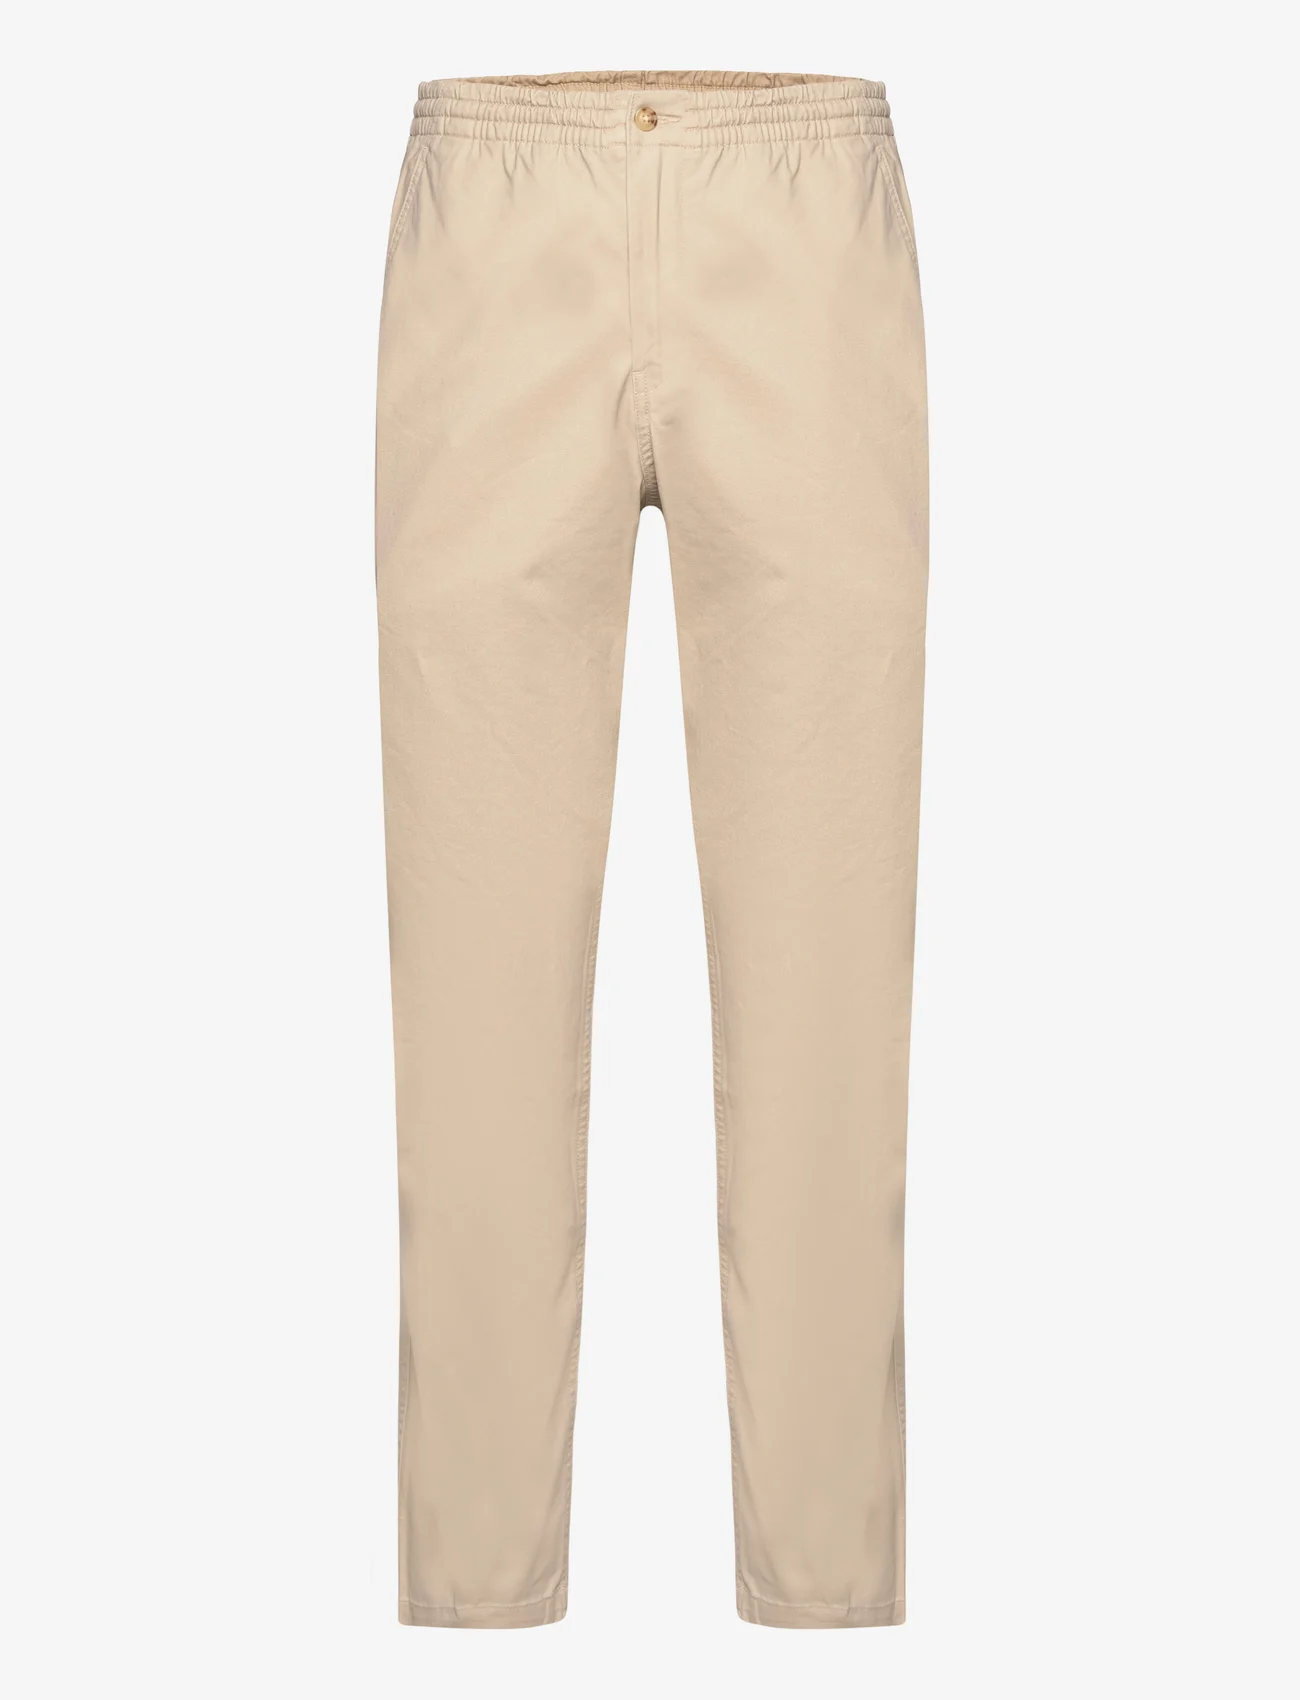 Polo Ralph Lauren - Polo Prepster Classic Fit Chino Pant - chinos - classic khaki - 0